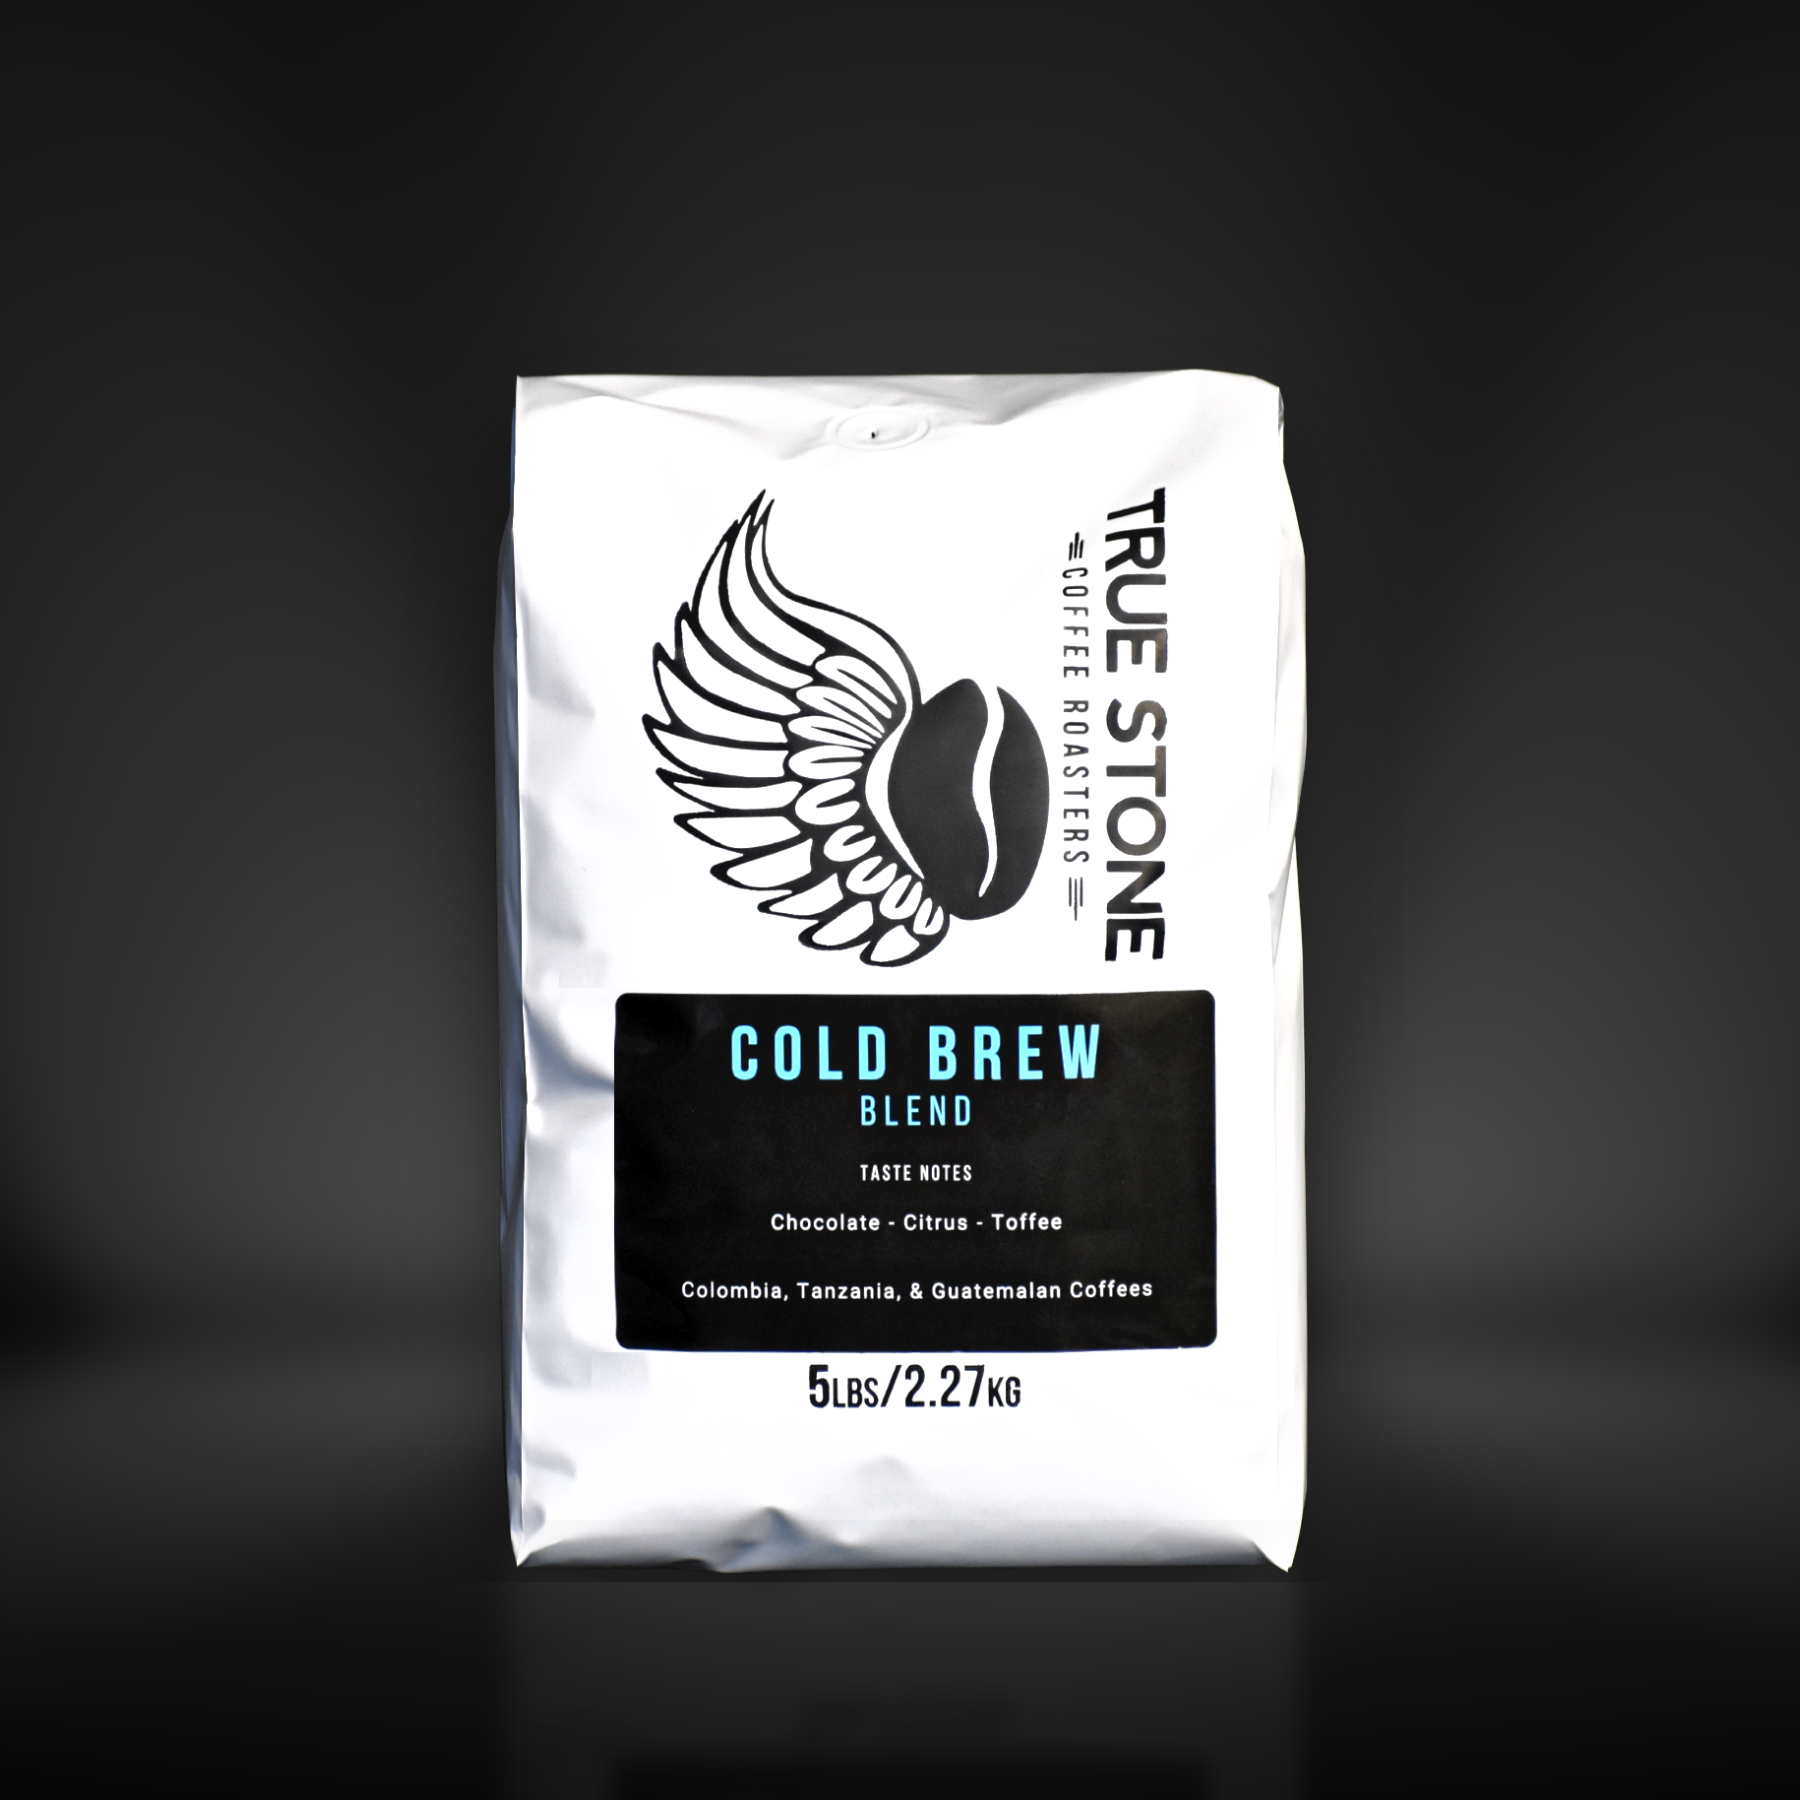  STONE COLD JO: 12 oz, Cold Brew Coffee Blend, Dark Roast,  Coarse Ground Organic Coffee, Silky, Smooth, Low Acidity, USDA Certified  Organic, Fair Trade Certified, NON-GMO, Great French Press Hot